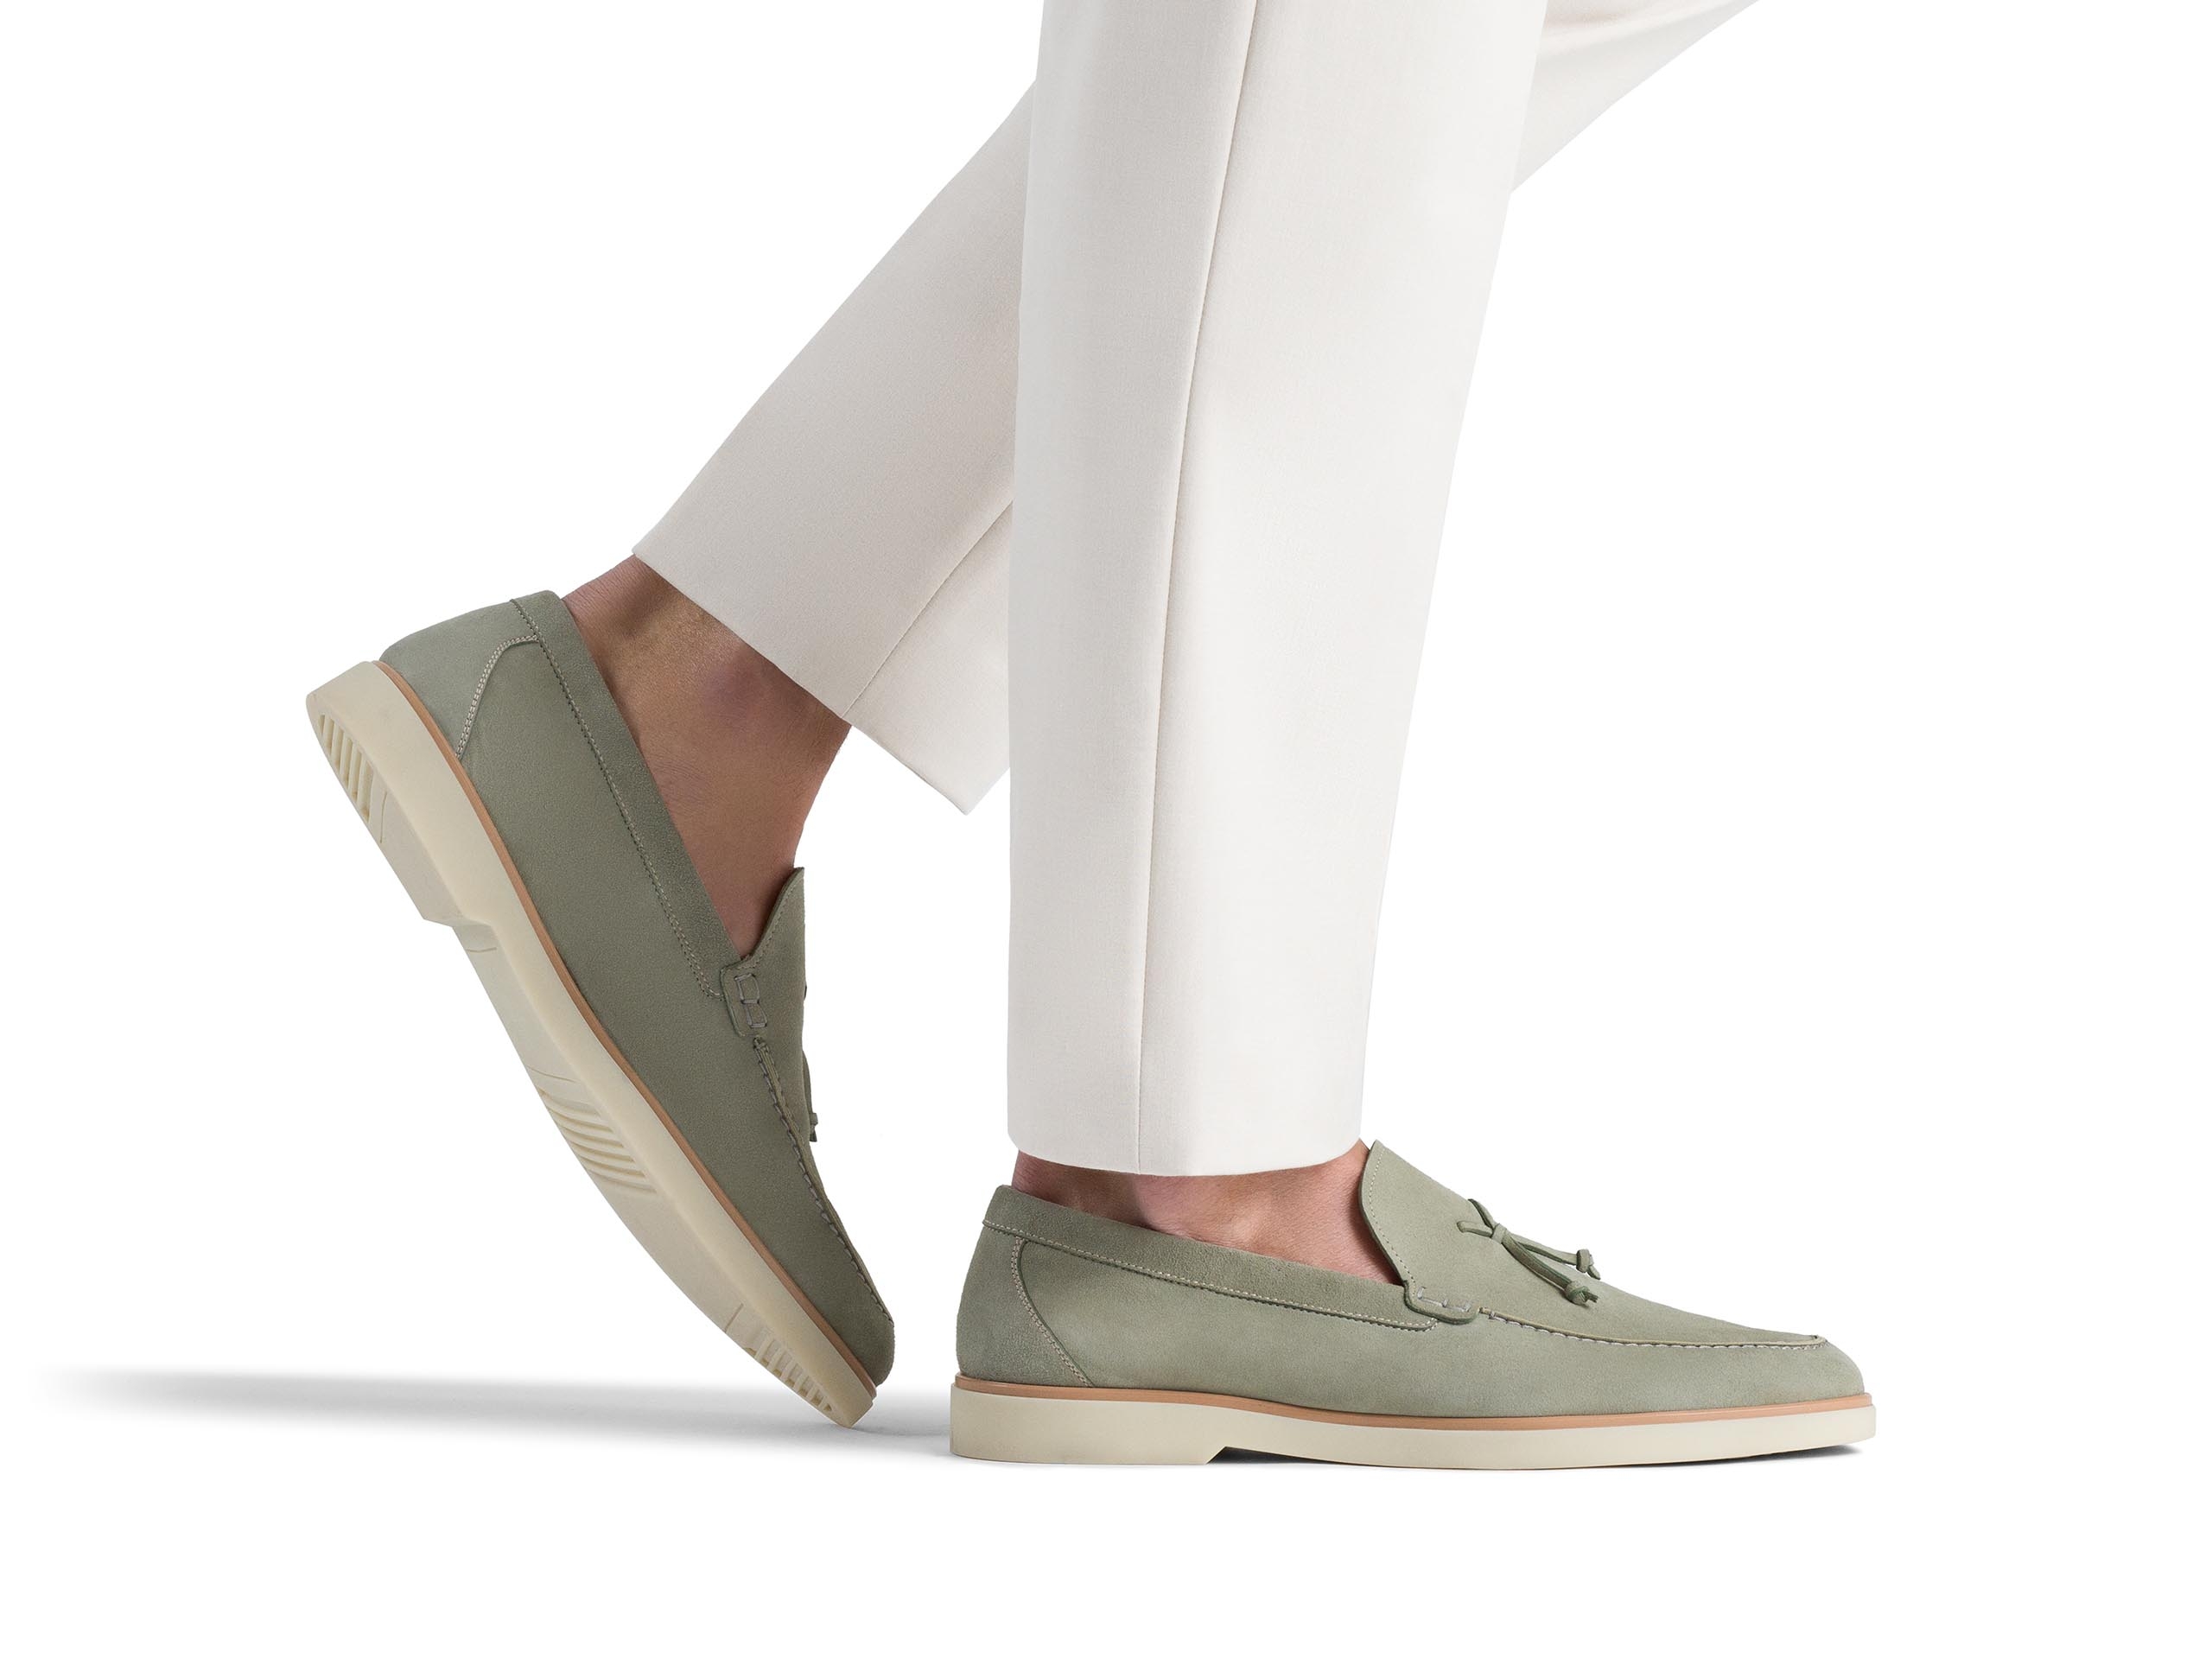 The Beignet Tassel Olive Green Suede pairs well with light color pants